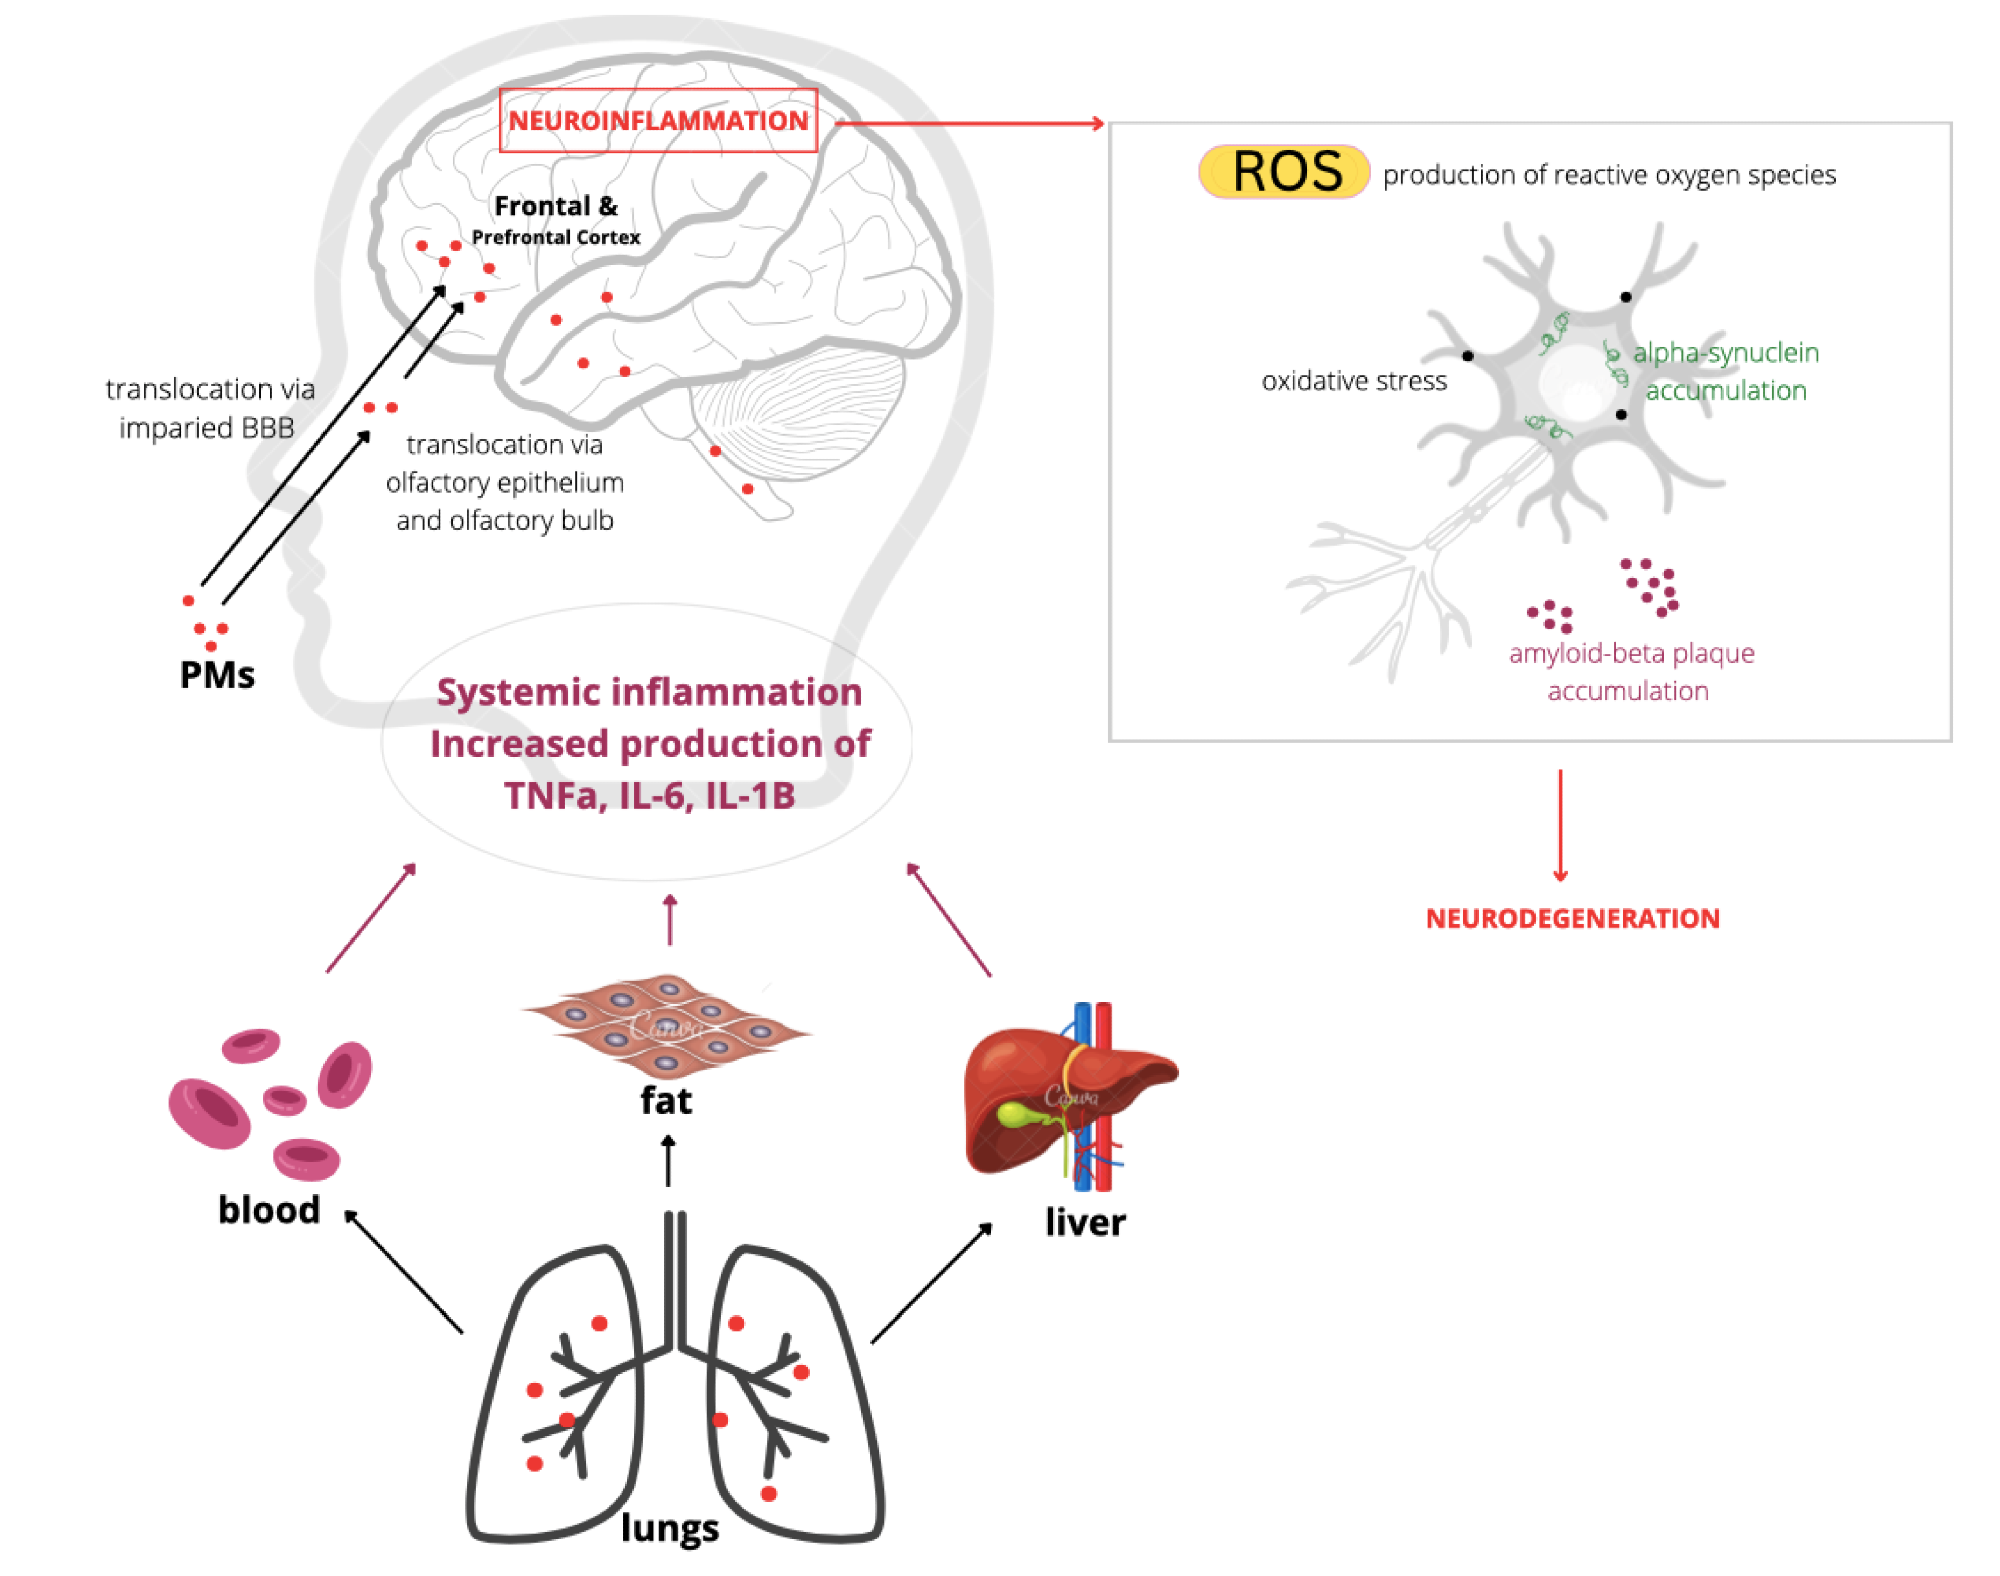 Example of mechanisms of action leading to developmental neurotoxicity from inhalation of particulate matter. Note: TNFa, tumor necrosis factor alpha; IL-6, interleukin-6; IL-1B, interleukin-1 beta; BBB, blood–brain barrier; ROS, reactive oxygen species.